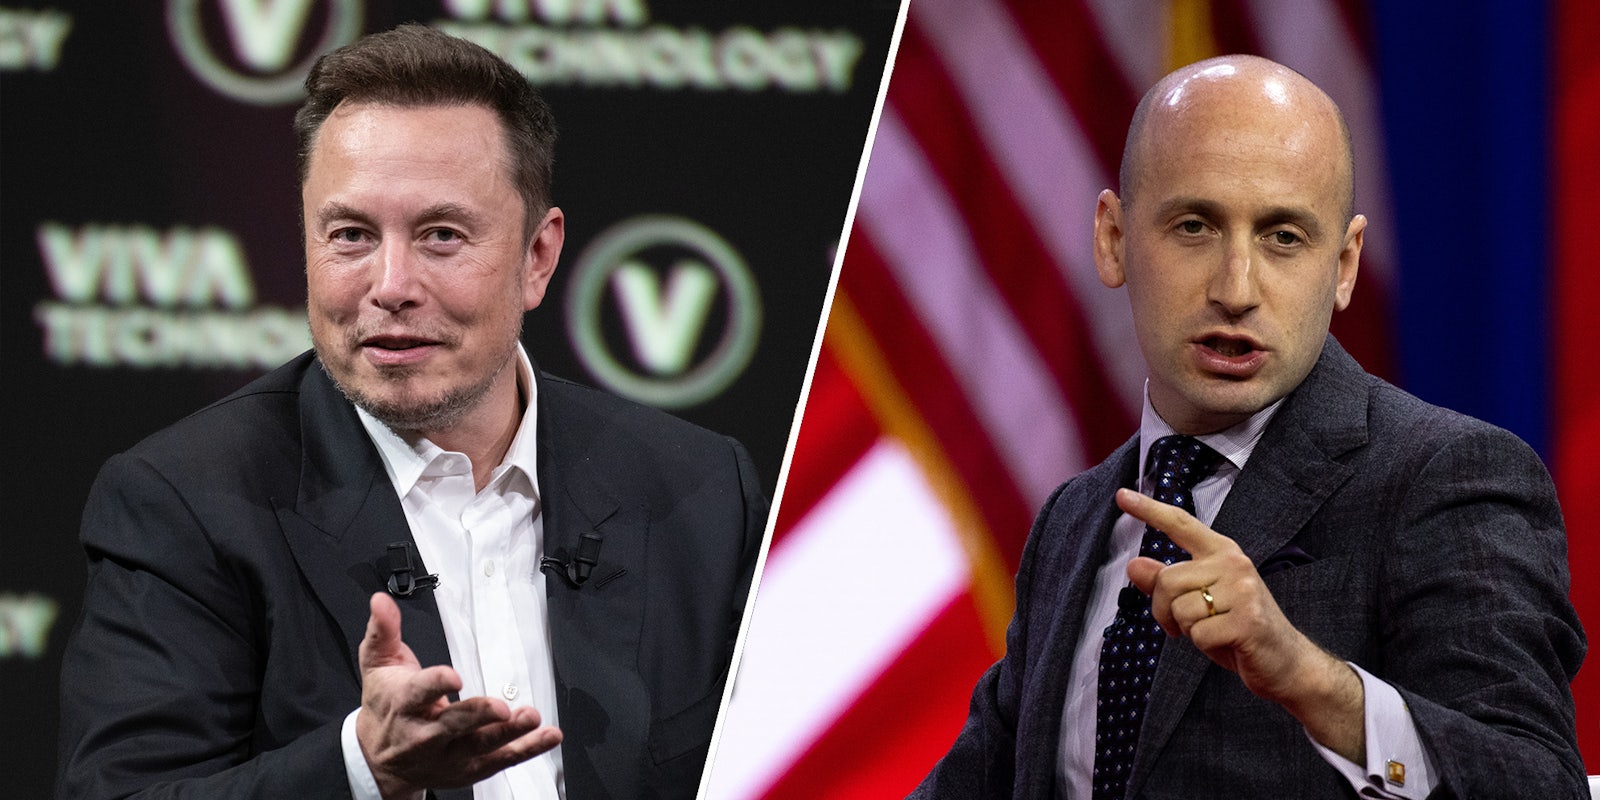 Elon Musk speaking in front of black and white background (l) Stephen Miller speaking in front of red white and blue background (r)